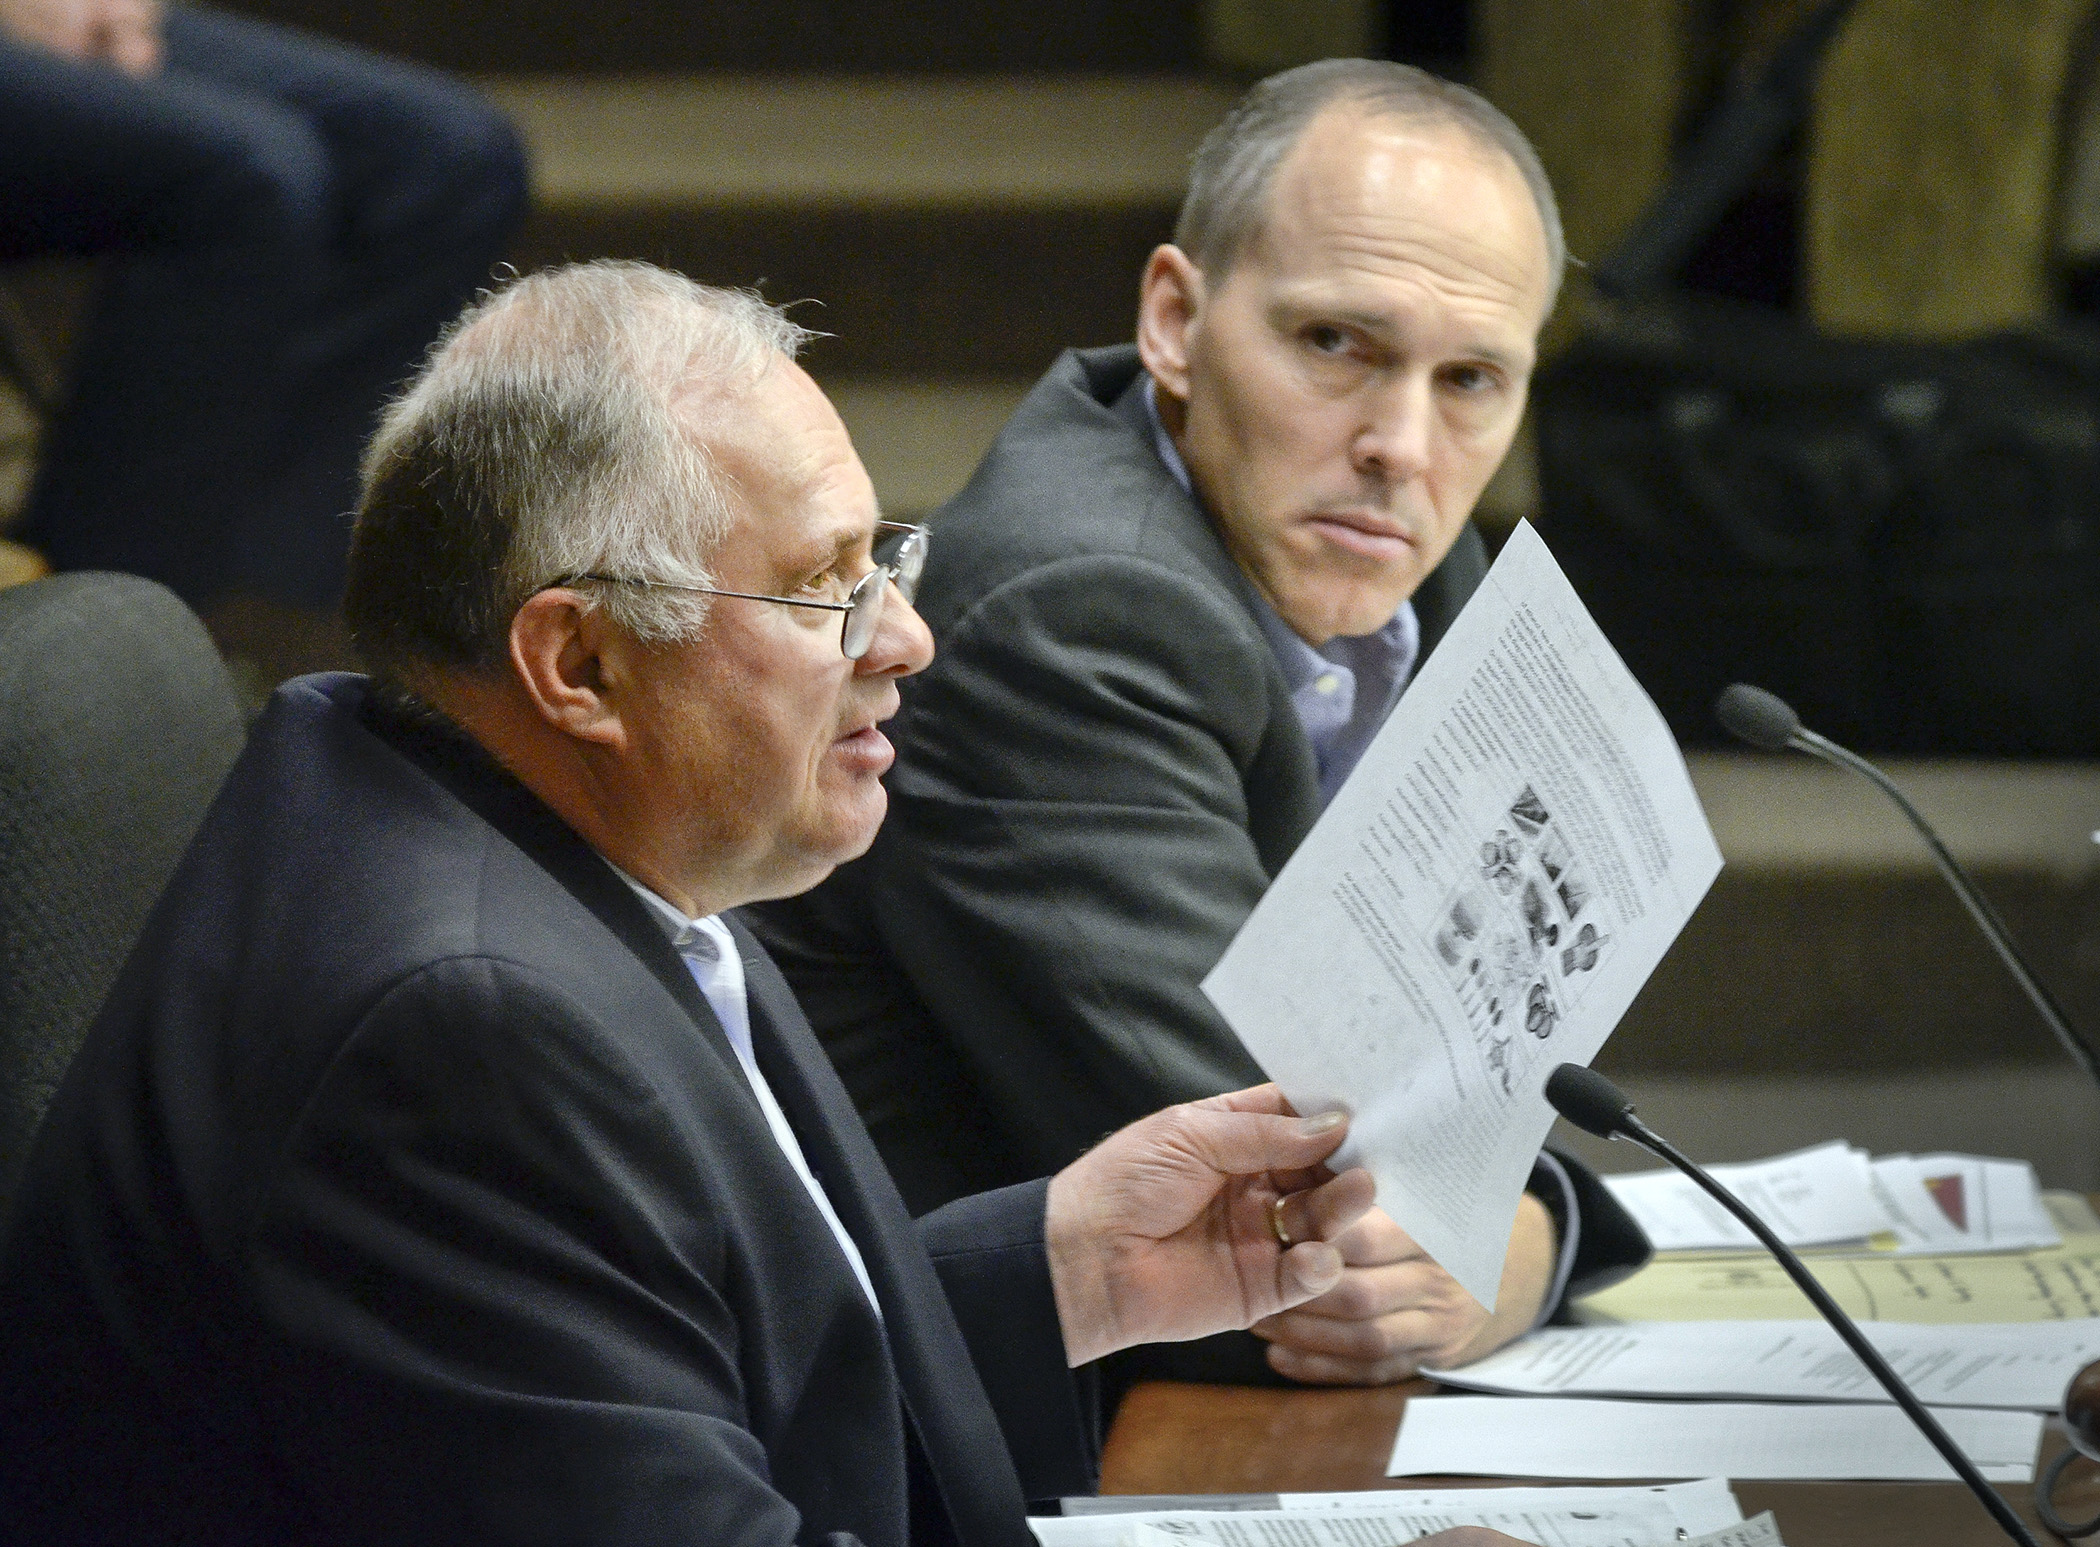 Larry Novakoske, chief financial officer at Central MN Ethanol Co-op, testifies in support of a bill sponsored by Rep. Rod Hamilton, right, to establish advanced biofuel, renewable chemical and biomass production incentive programs. Photo by Andrew VonBank.